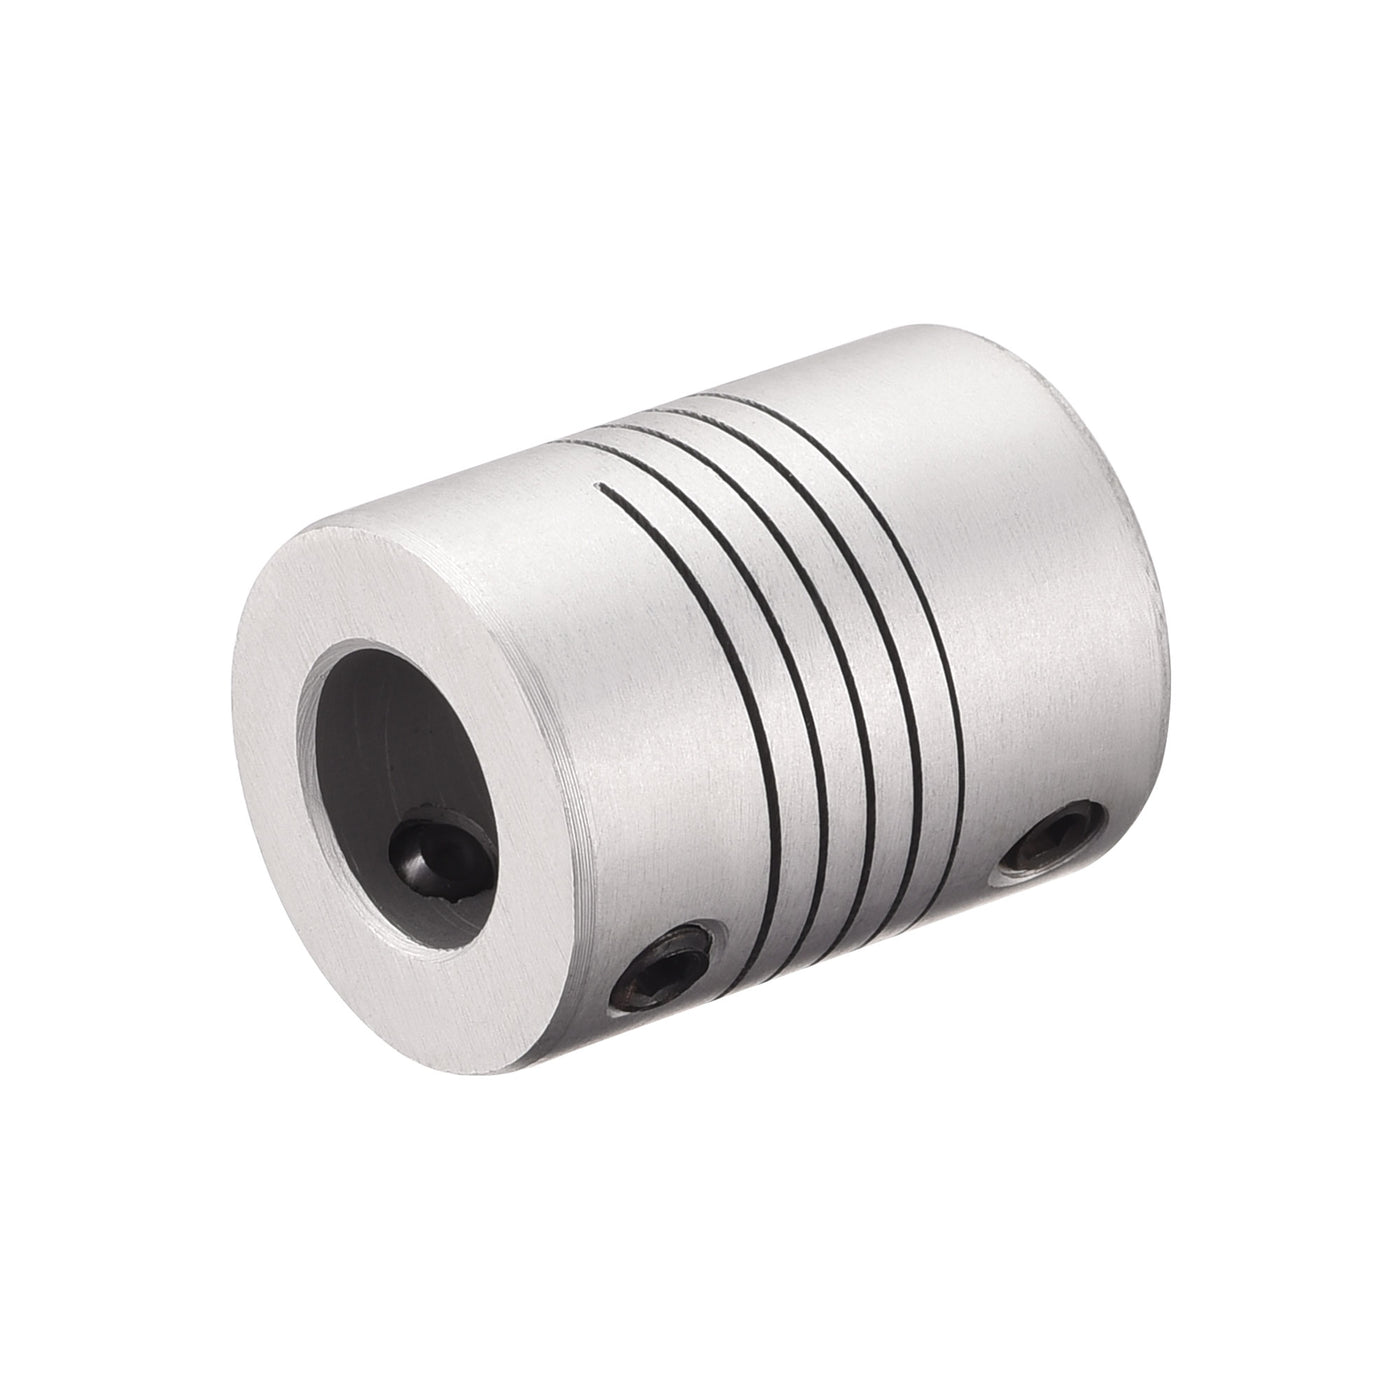 uxcell Uxcell 5mm to 10mm Aluminum Alloy Shaft Coupling Flexible Coupler L25xD19 Silver,5pcs